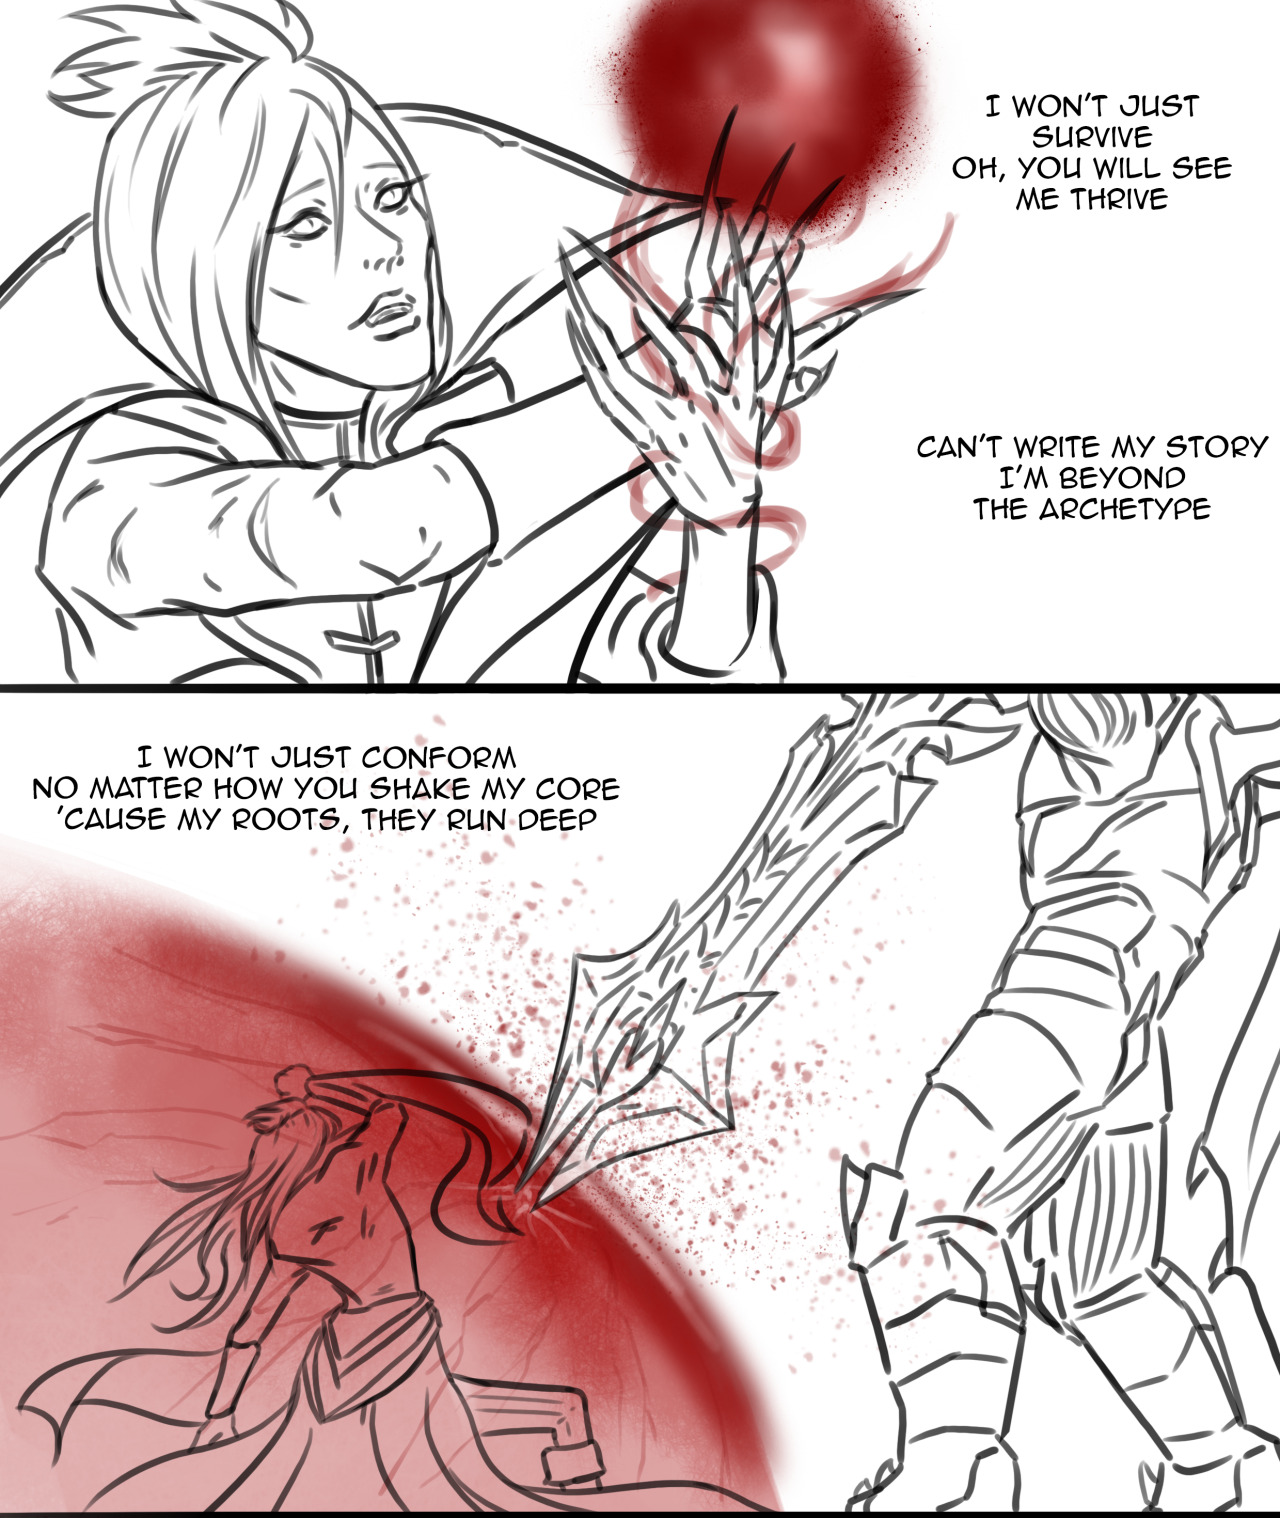 MCU / LoL crossover -   Training - Crossover between League of Legends and Marvel with Vladimir as the Scarlet Witch and here Draven as Vision and Aatrox as Thanos
I already drew a lot for Lilith based on Wandas postures ; her gestures are so good, especially for someone like me who hates drawing hands XD #league of legends #art #league of fanart #lol fanart#draven #draven league of legends #aatrox #vladimir league of legends #Scarlet Witch#MCU#marvel#crossover #league of legends art #lol art#league art #draven x vladimir #dravimir#comics #LoL League of Legends #fanart#digital art